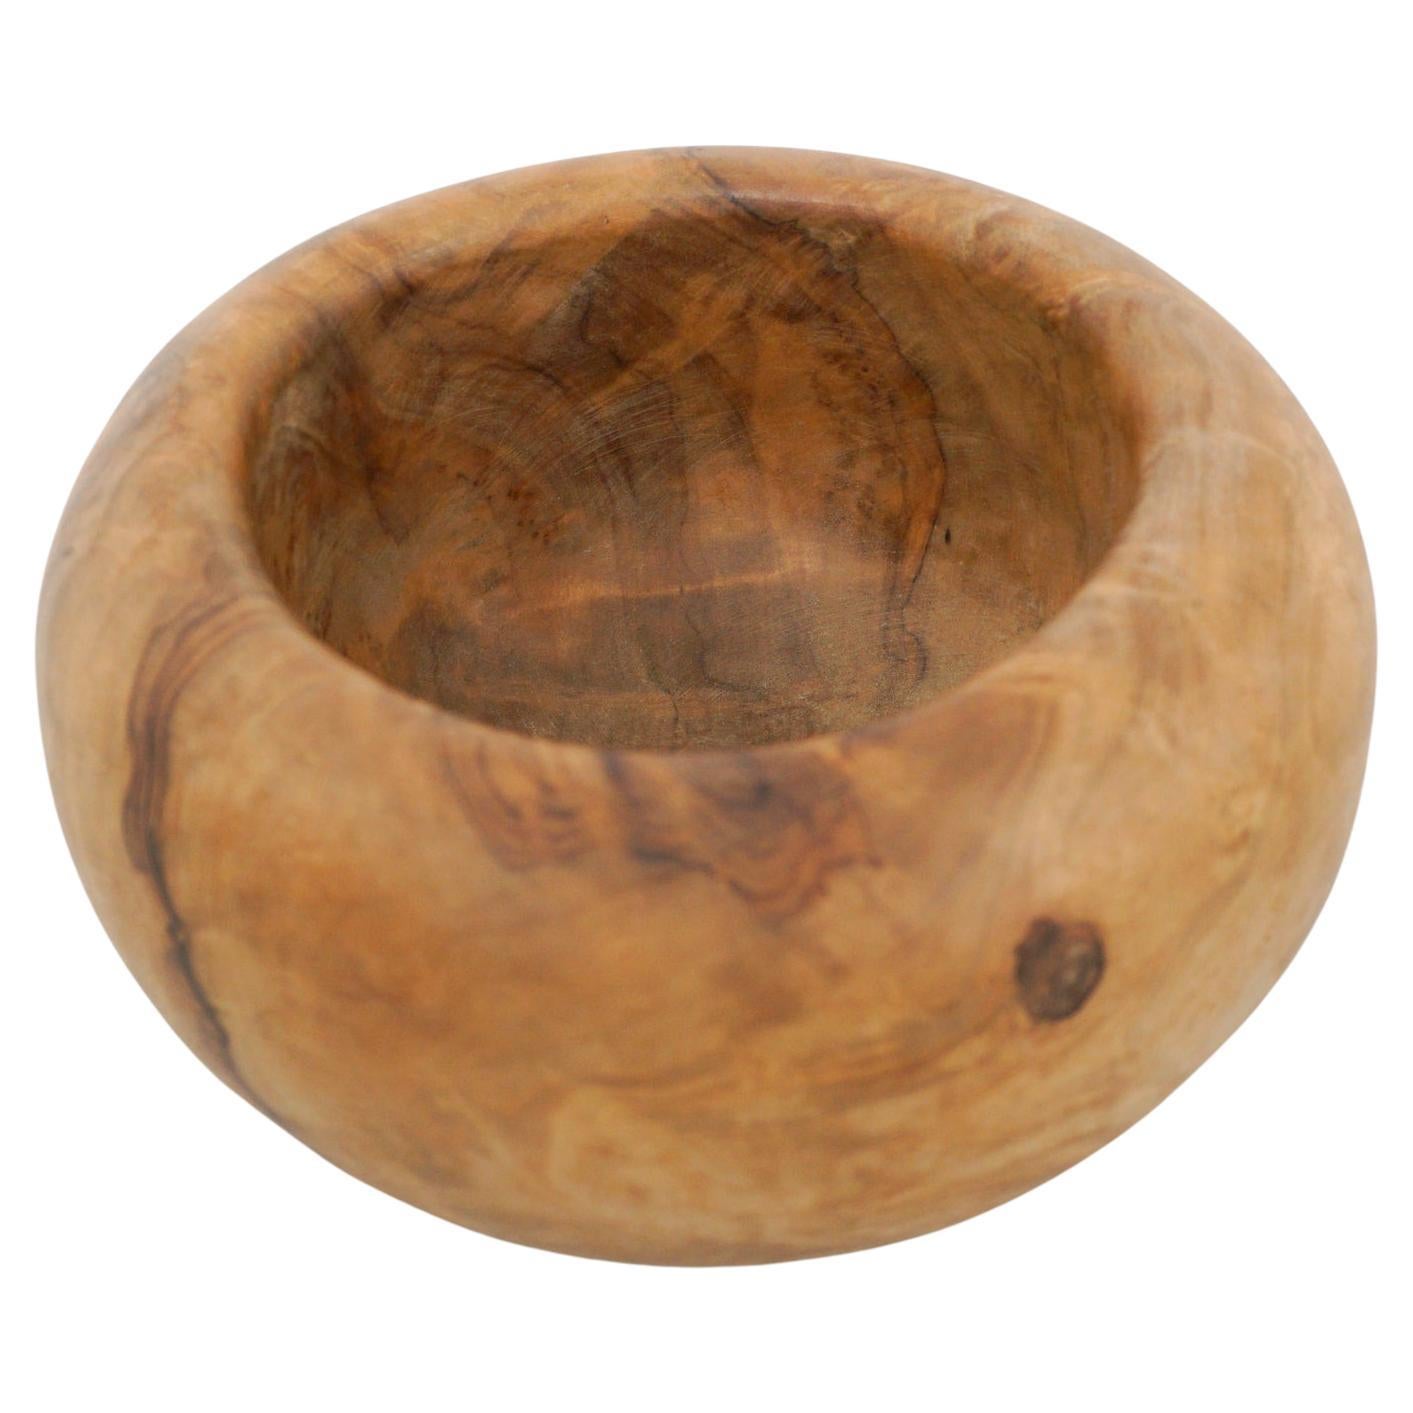 Early 20th Century Spanish Traditional Olive Wood Bowl